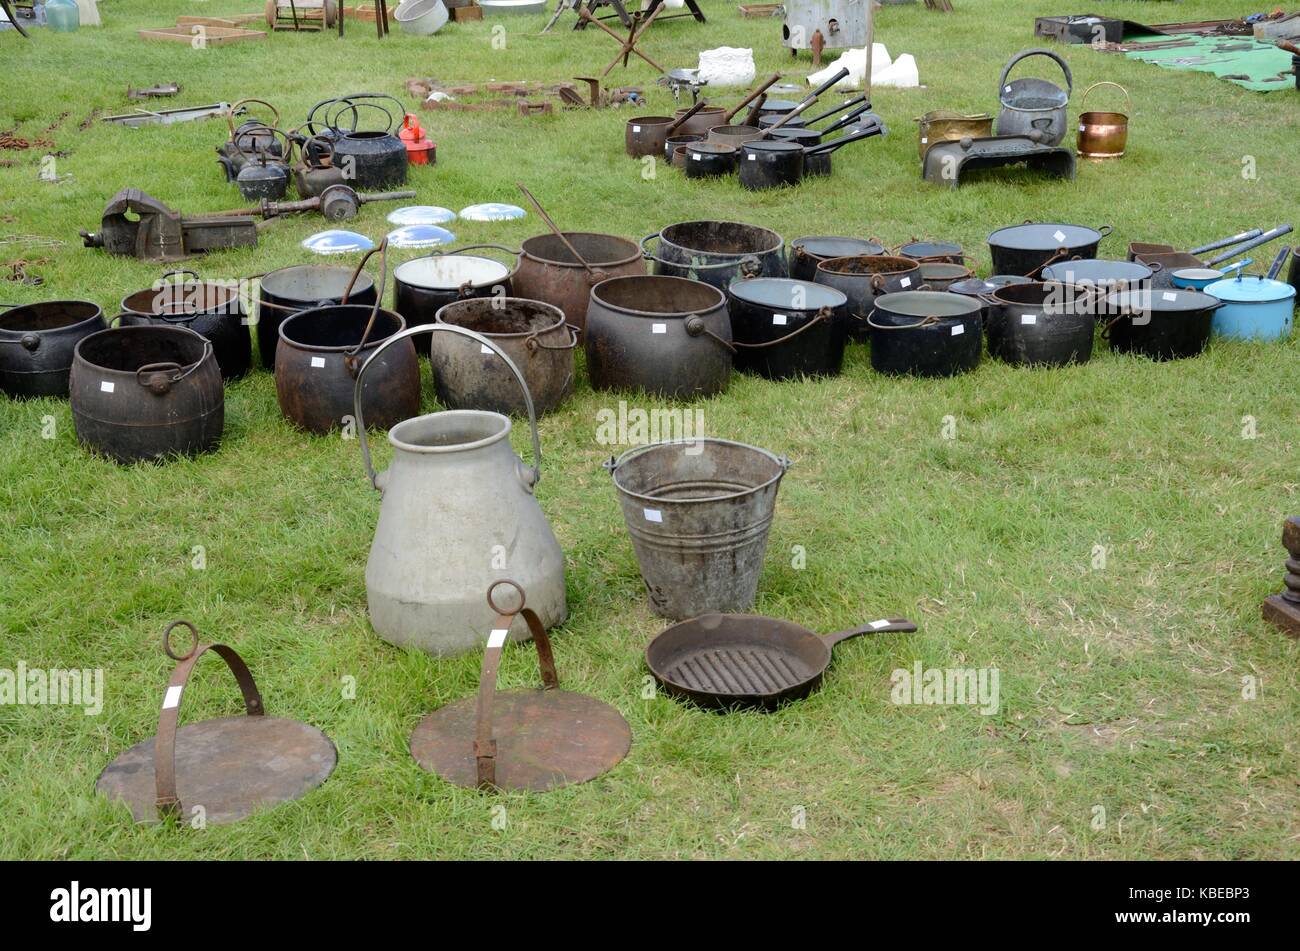 Old cast iron cooking pots and kitchen utensils at a flea market Builth Wells Wales Cymru UK GB Stock Photo